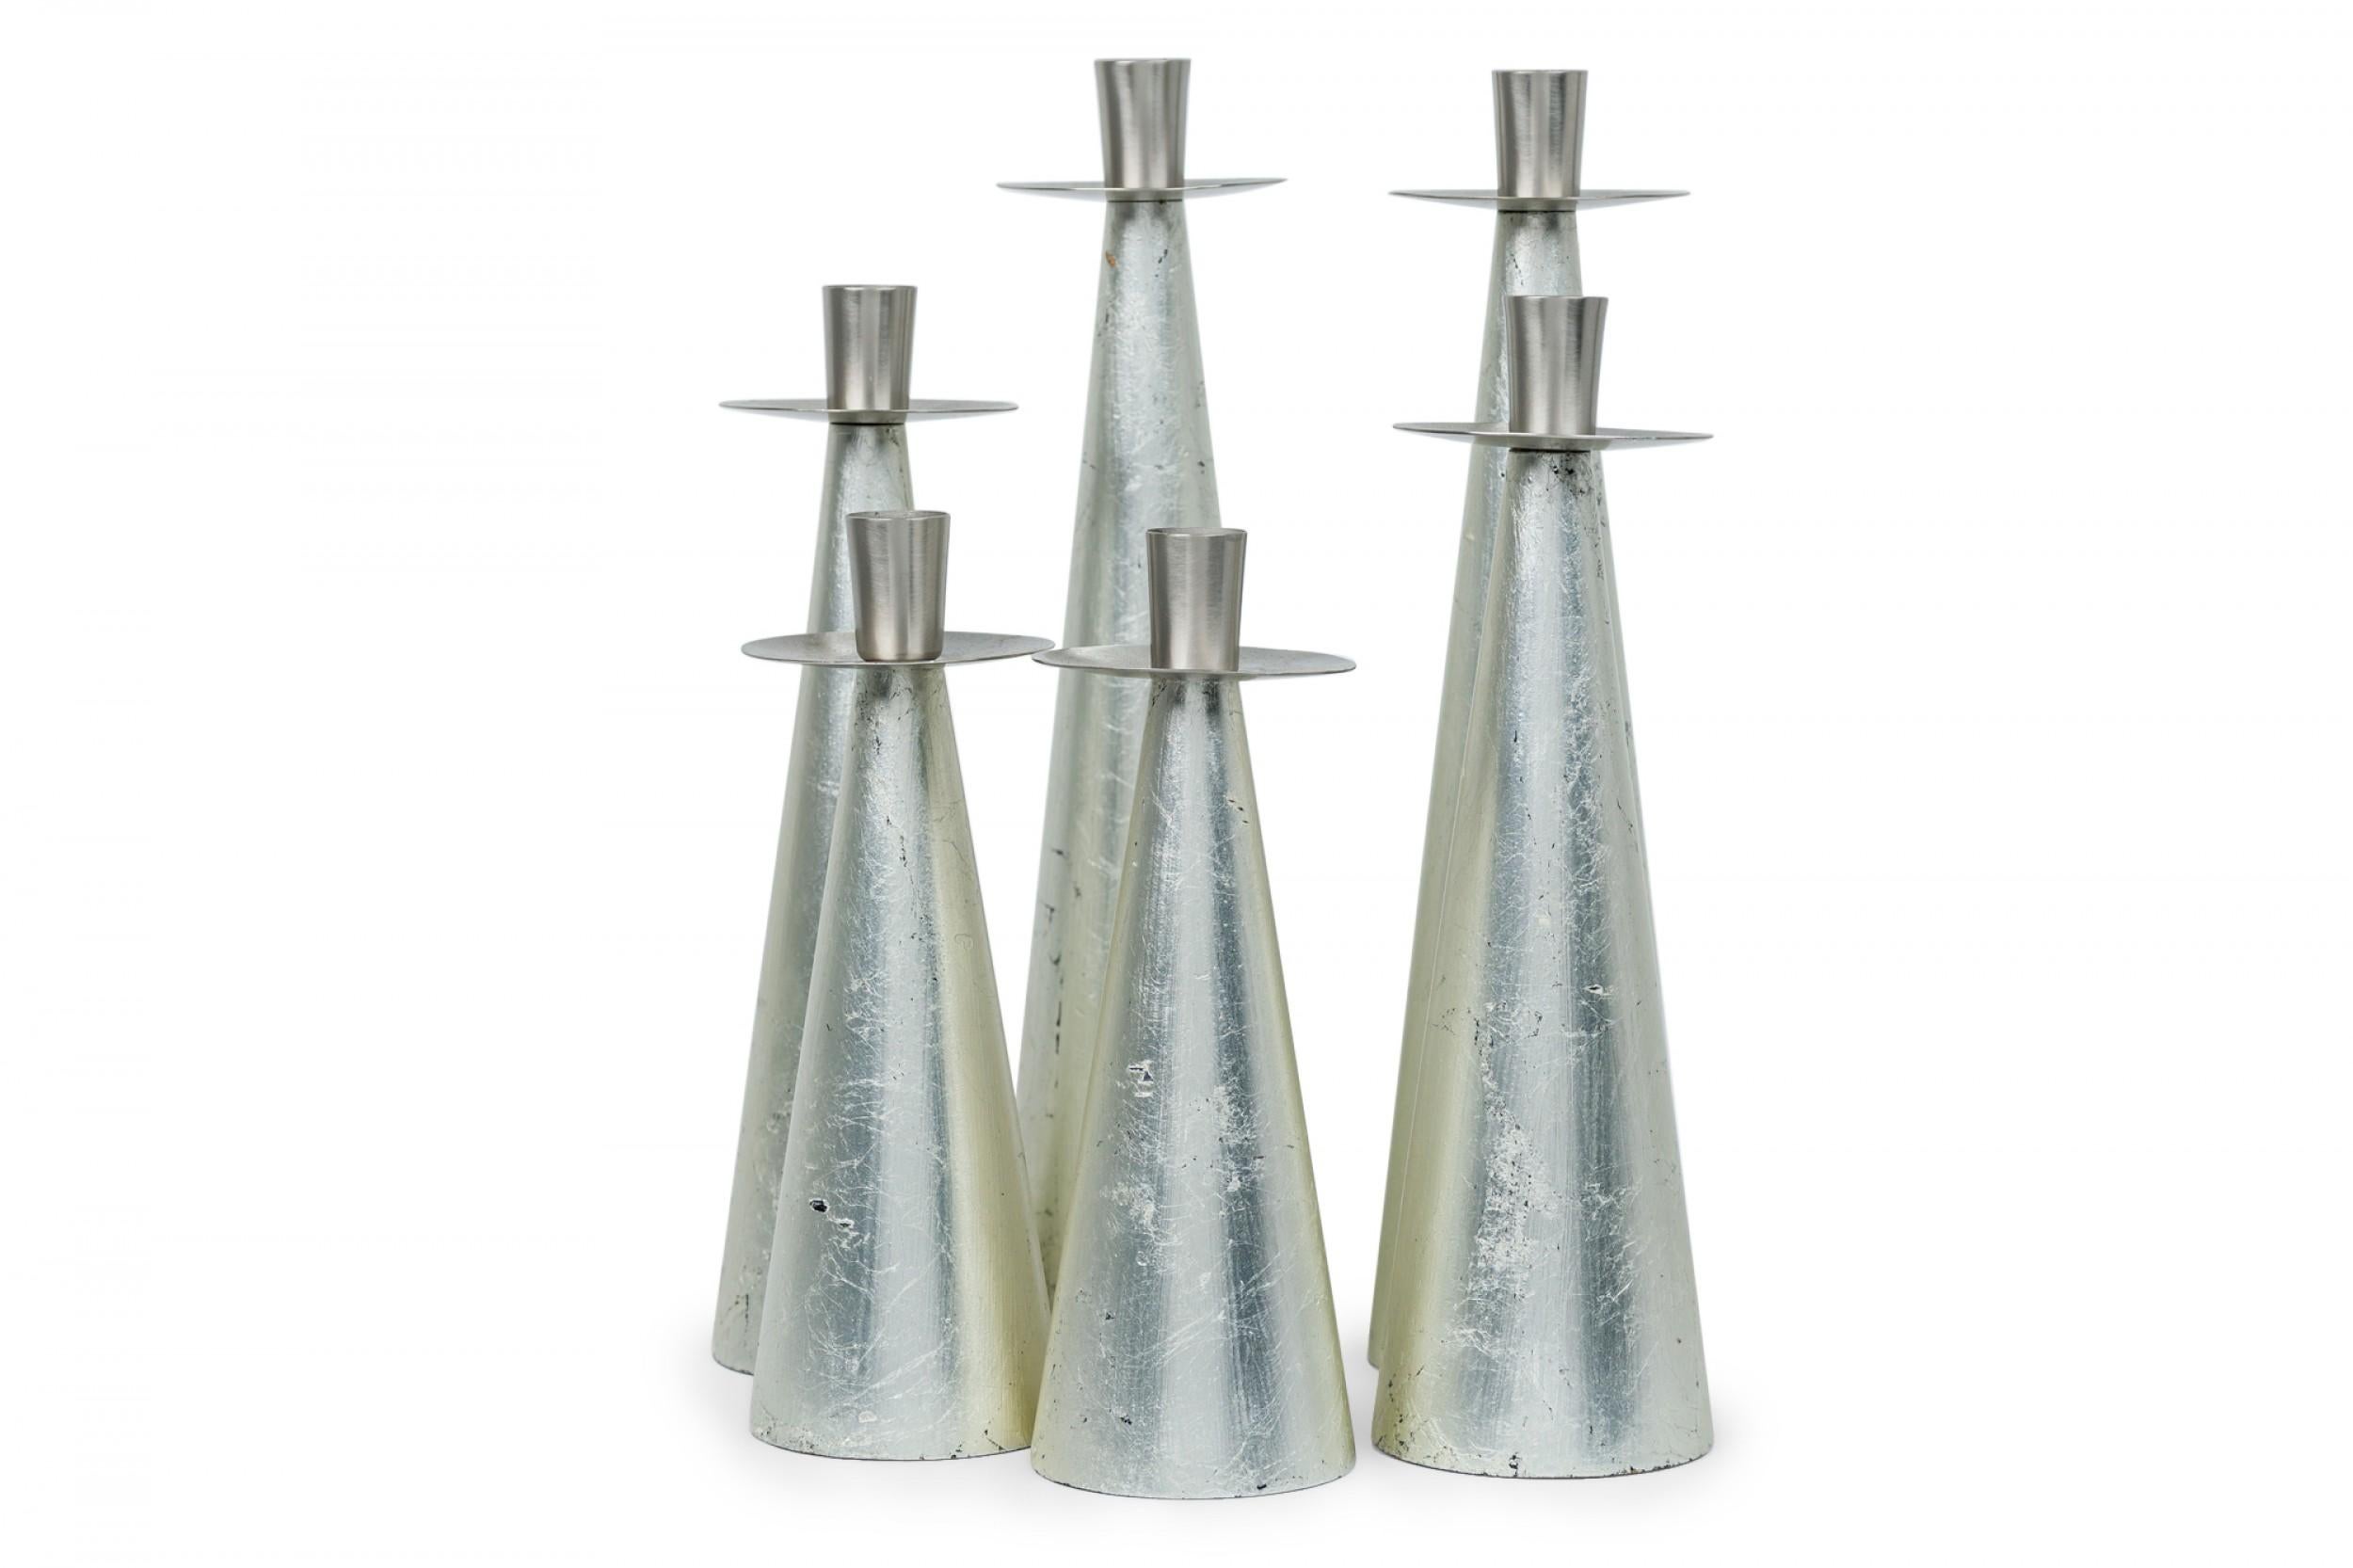 SET of 6 midcentury American wood and silver leaf candlesticks with brushed silver metal removable bobeches. (WILSON\'s CARMEL) (PRICED AS SET).